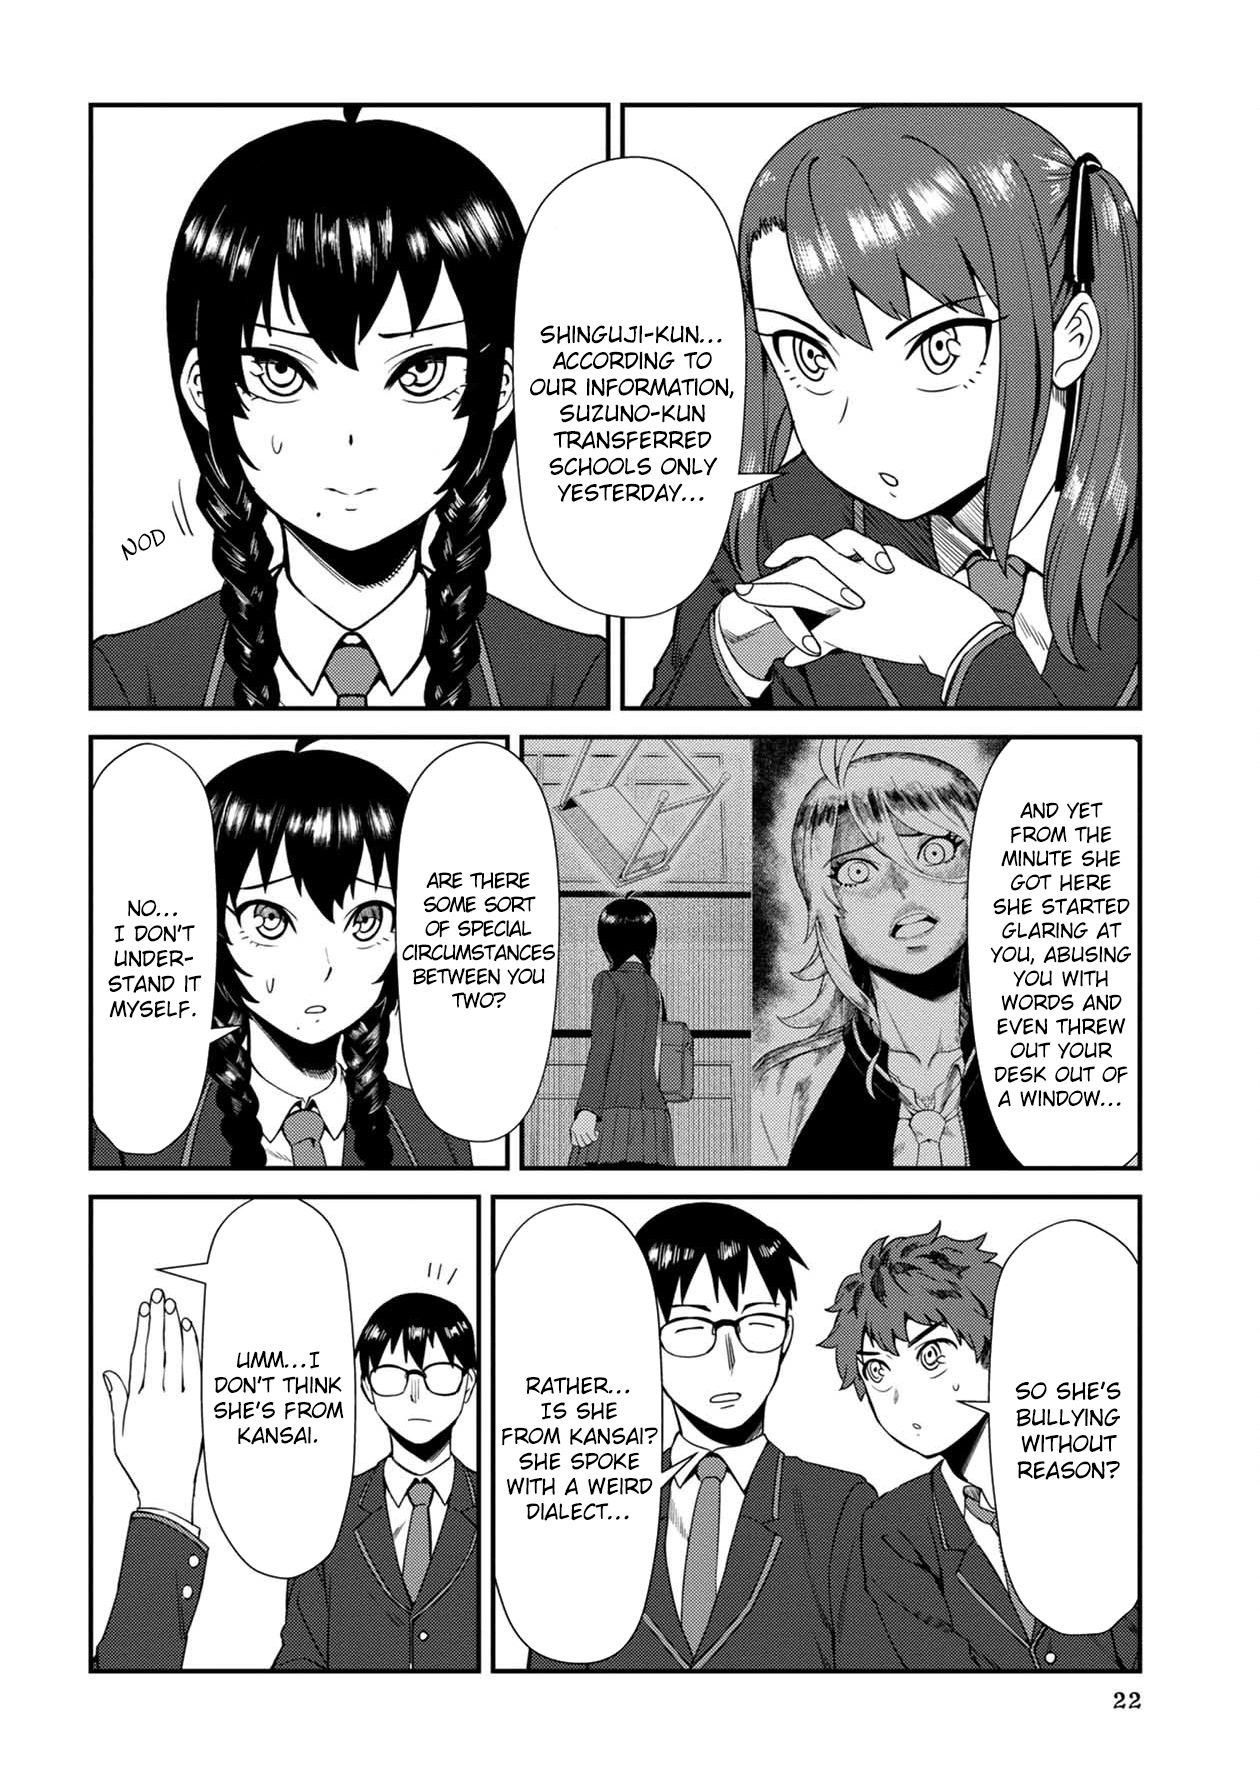 Bad Girl-Exorcist Reina Chapter 2: Exorcism #2: Rumors About The Transfer Student - Picture 2